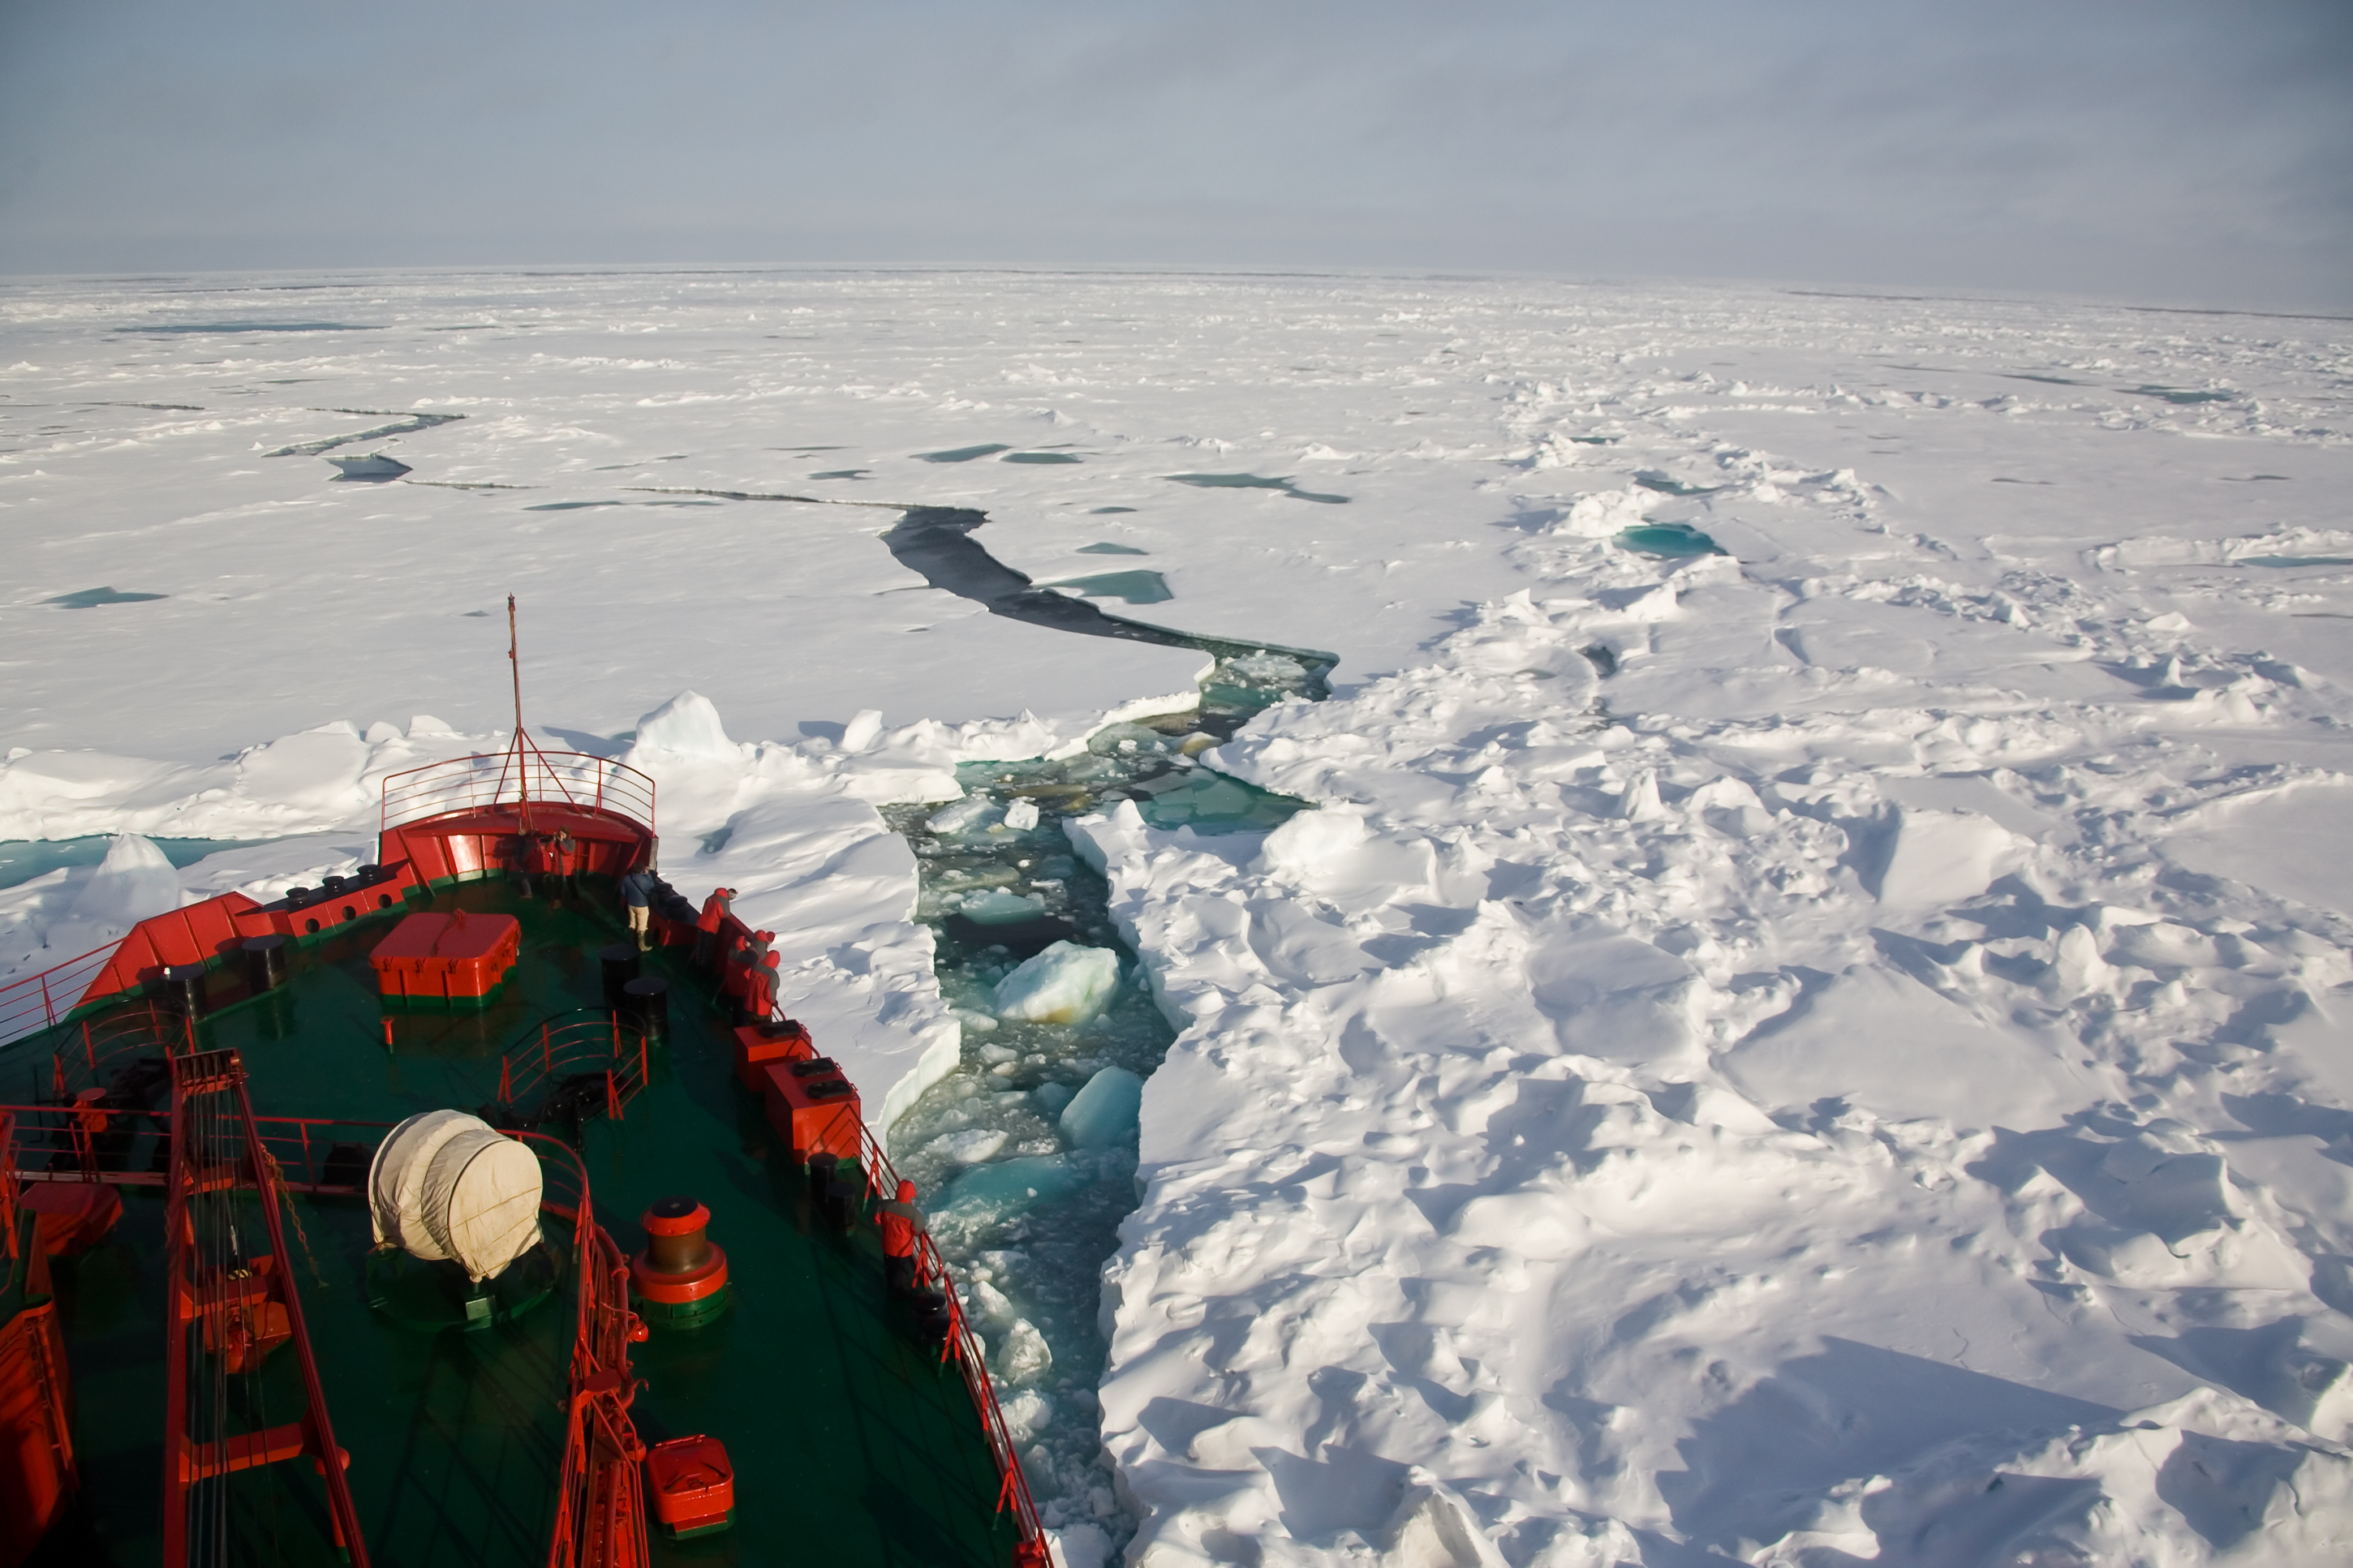 ship melting arctic sea ice (SeppFriedhuber. E+. Getty Images)